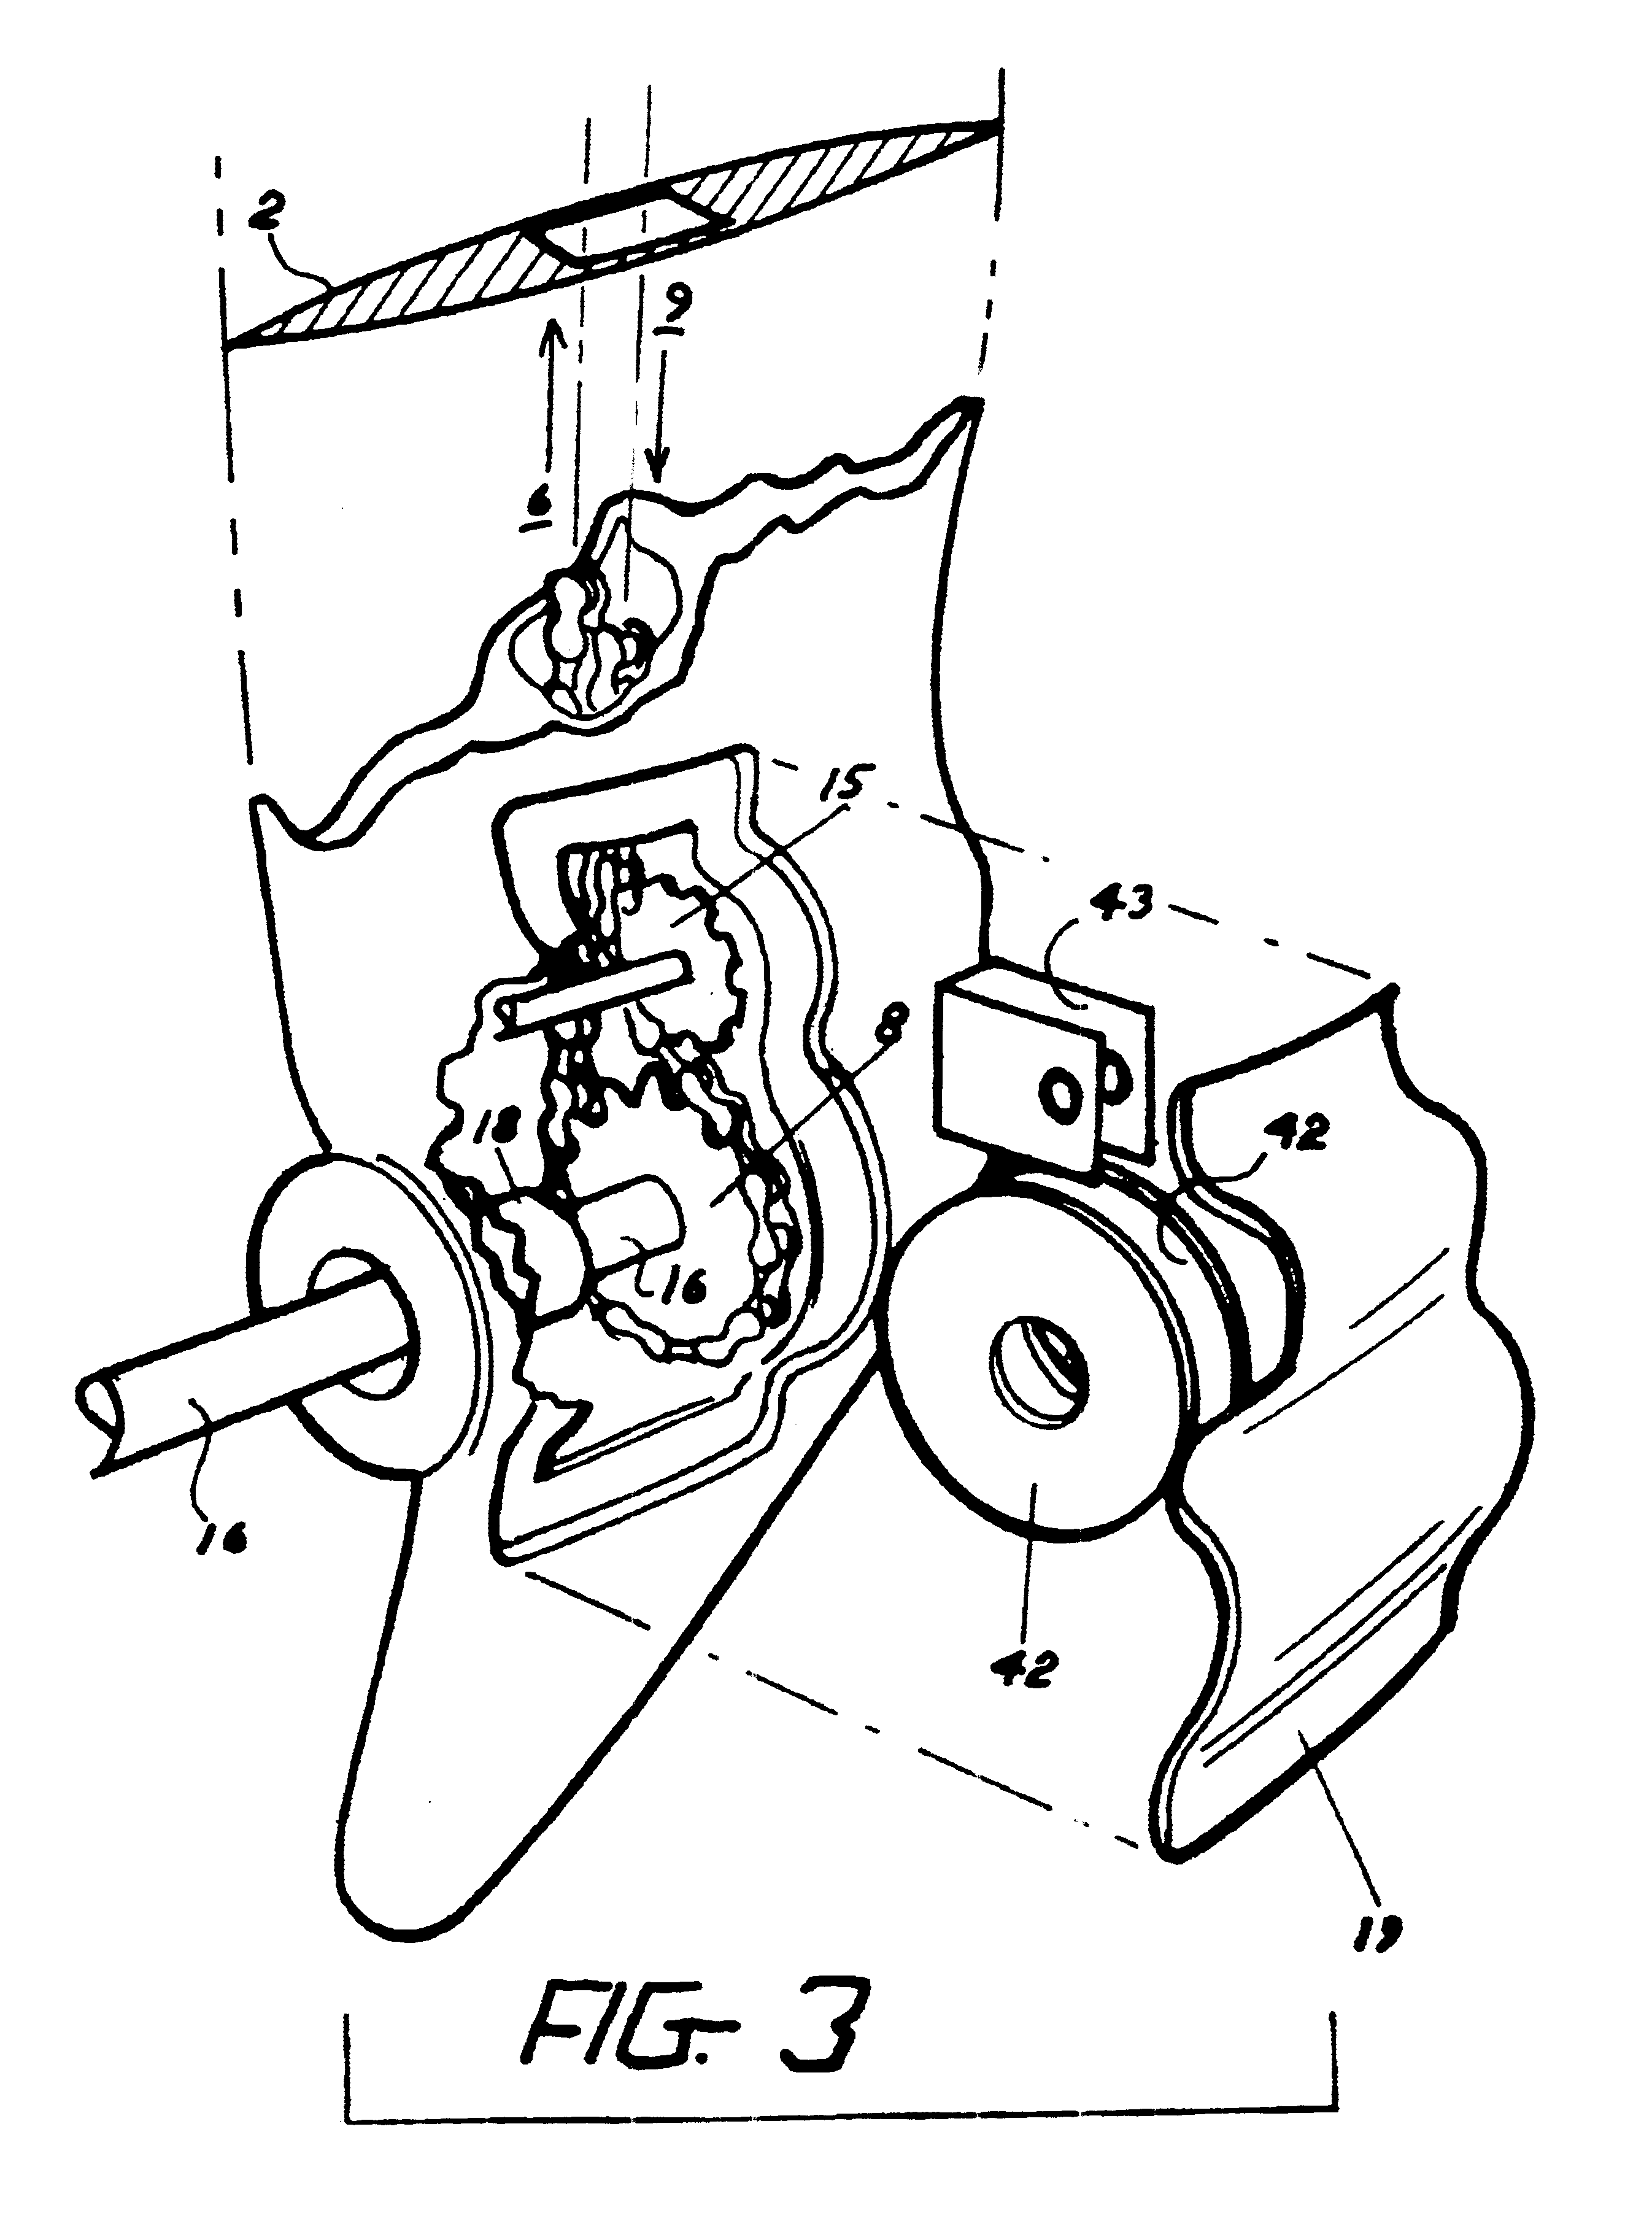 Self-tensioning pedal drive mechanism for a human powered boat